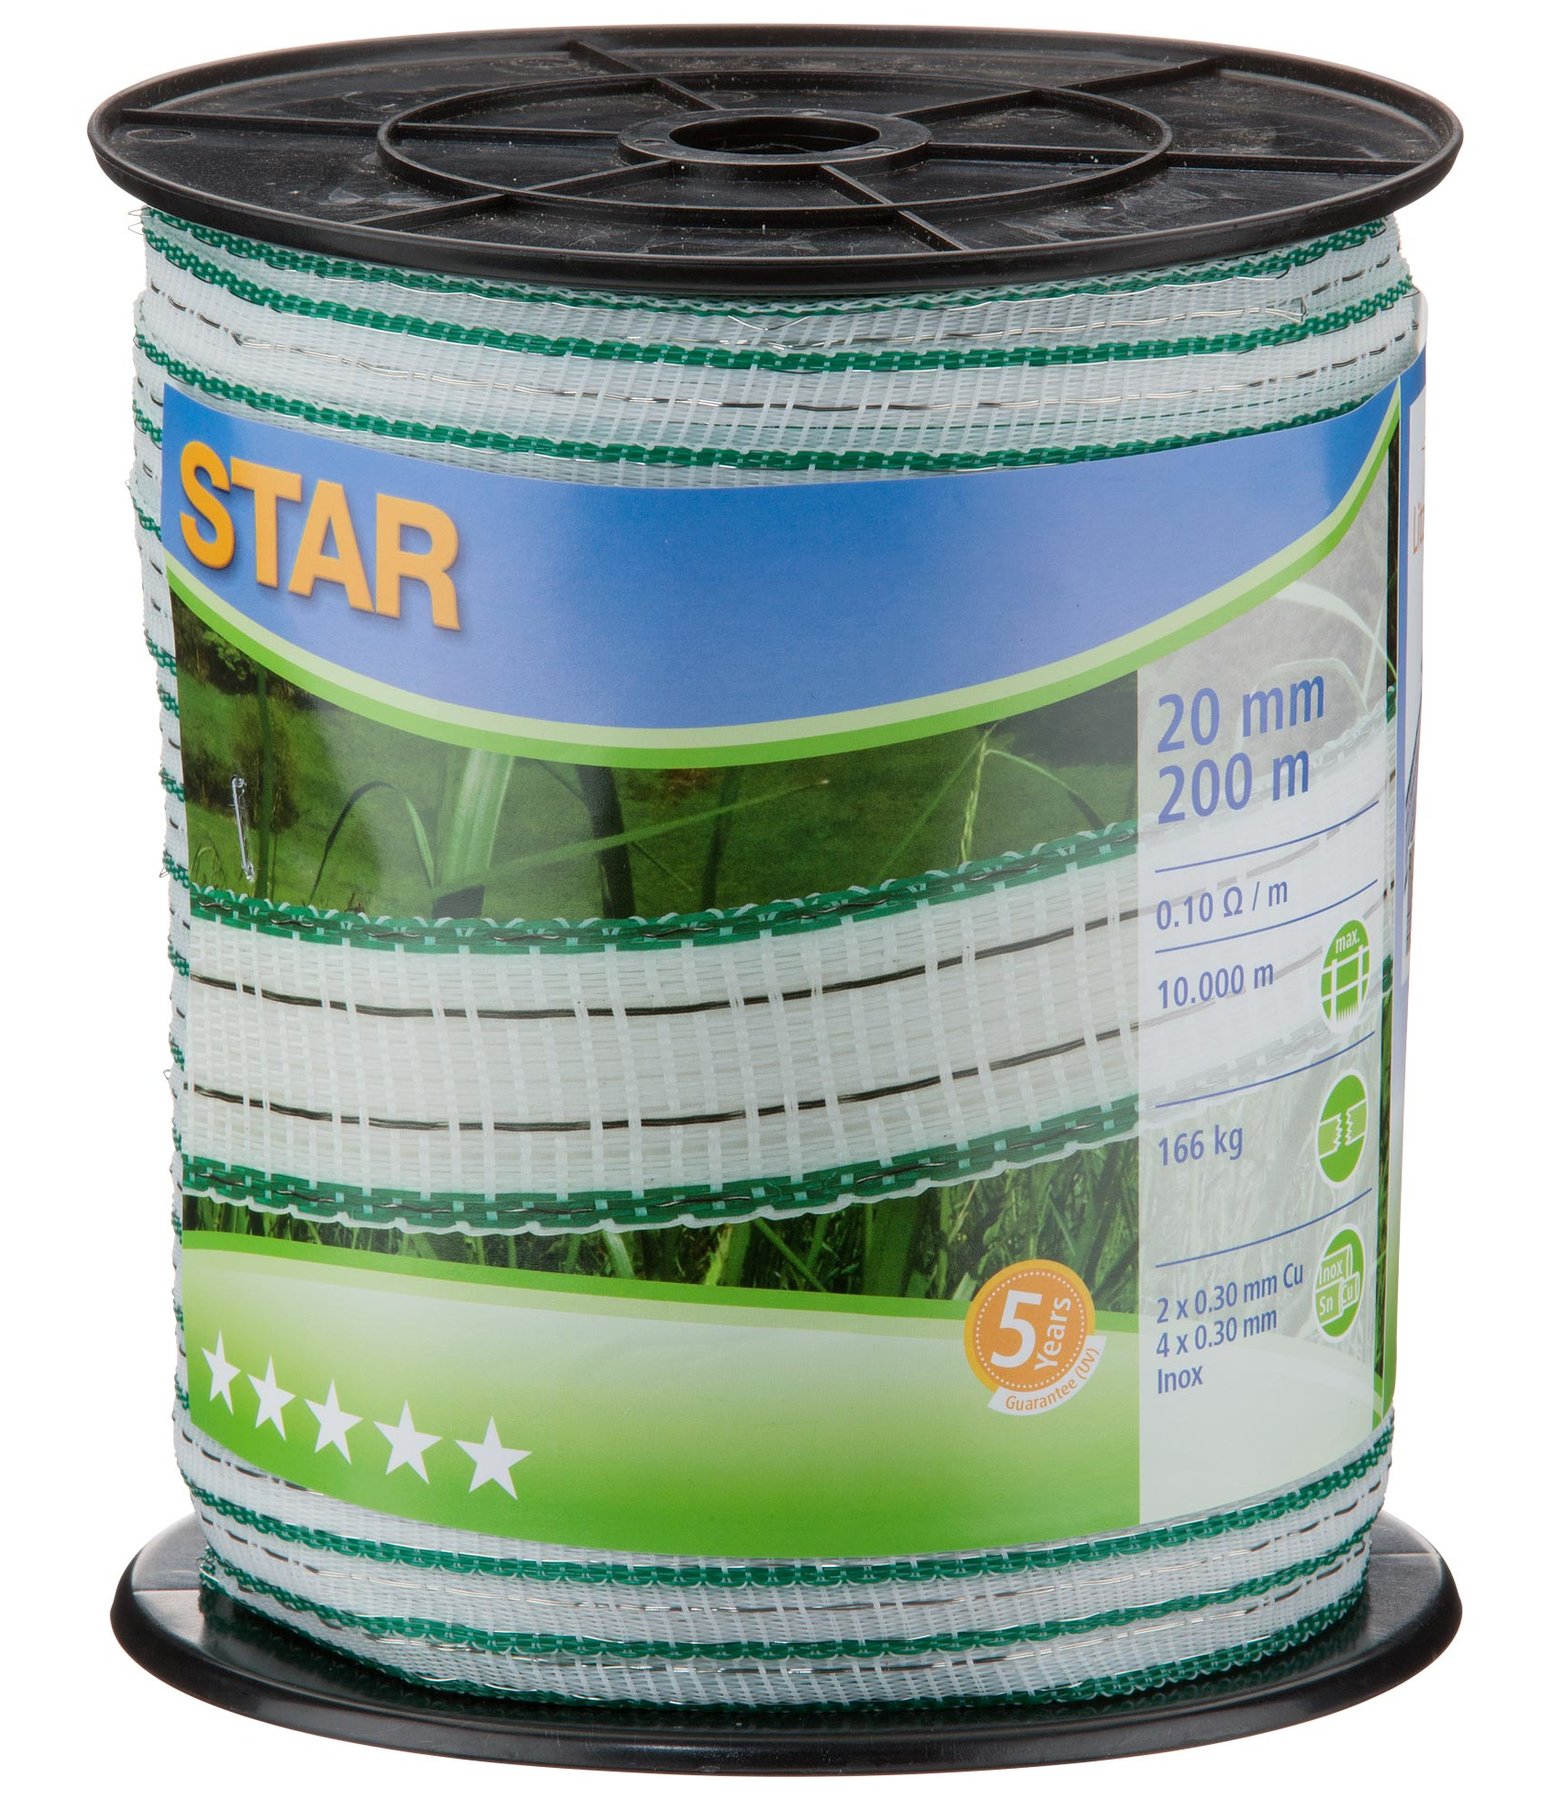 Breitband Star Class DeLuxe 20 mm - 200 m Rolle